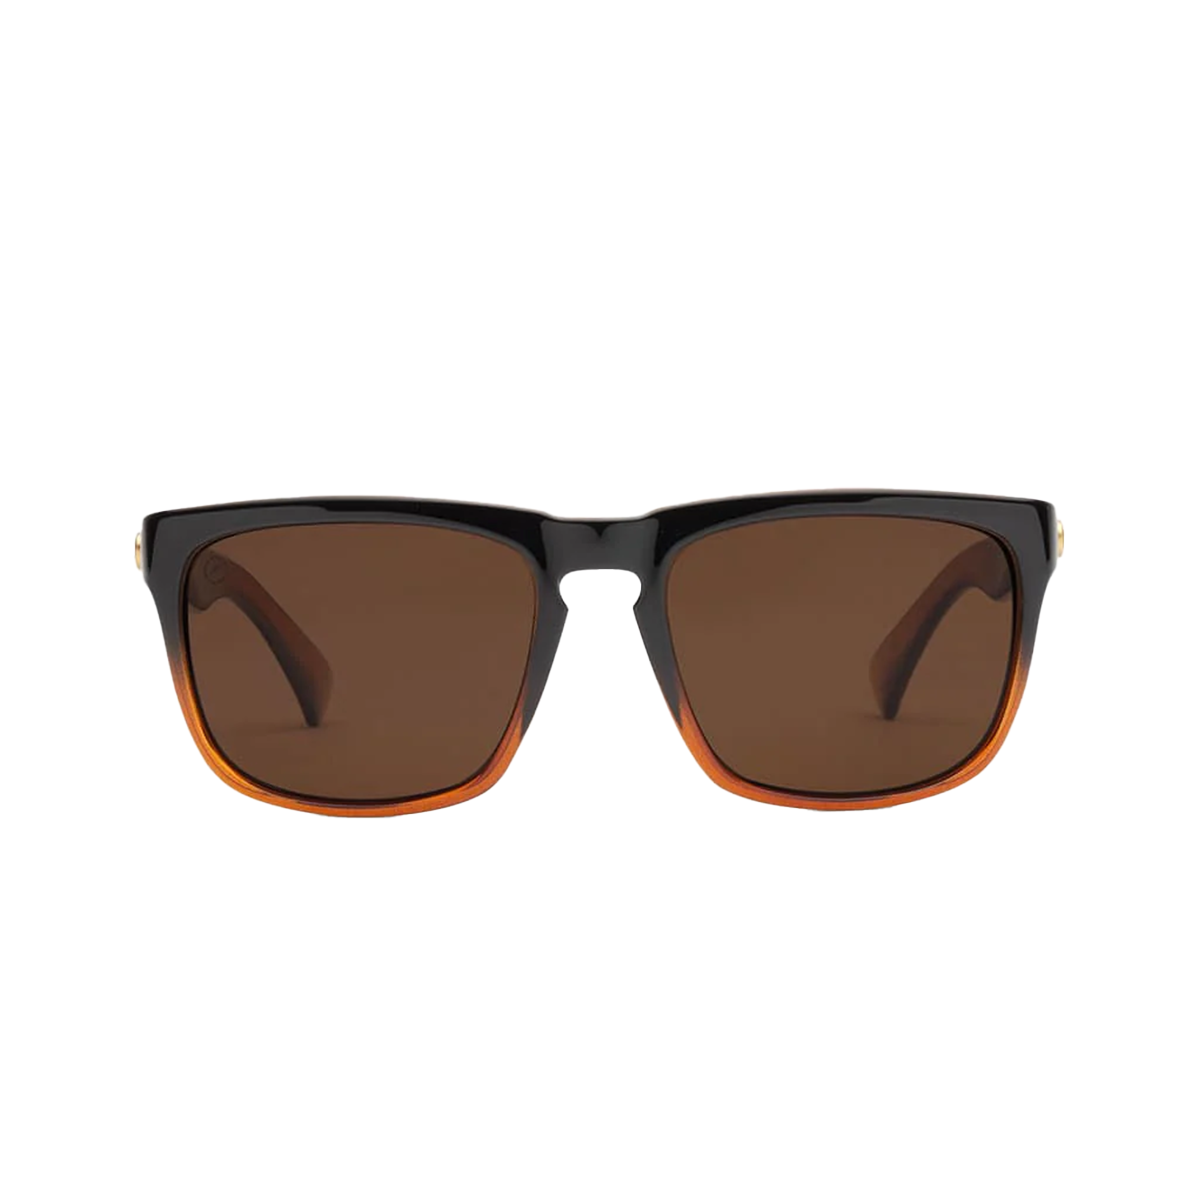 Electric Knoxville XL Sunglasses - Black Amber/ Bronze Polarized